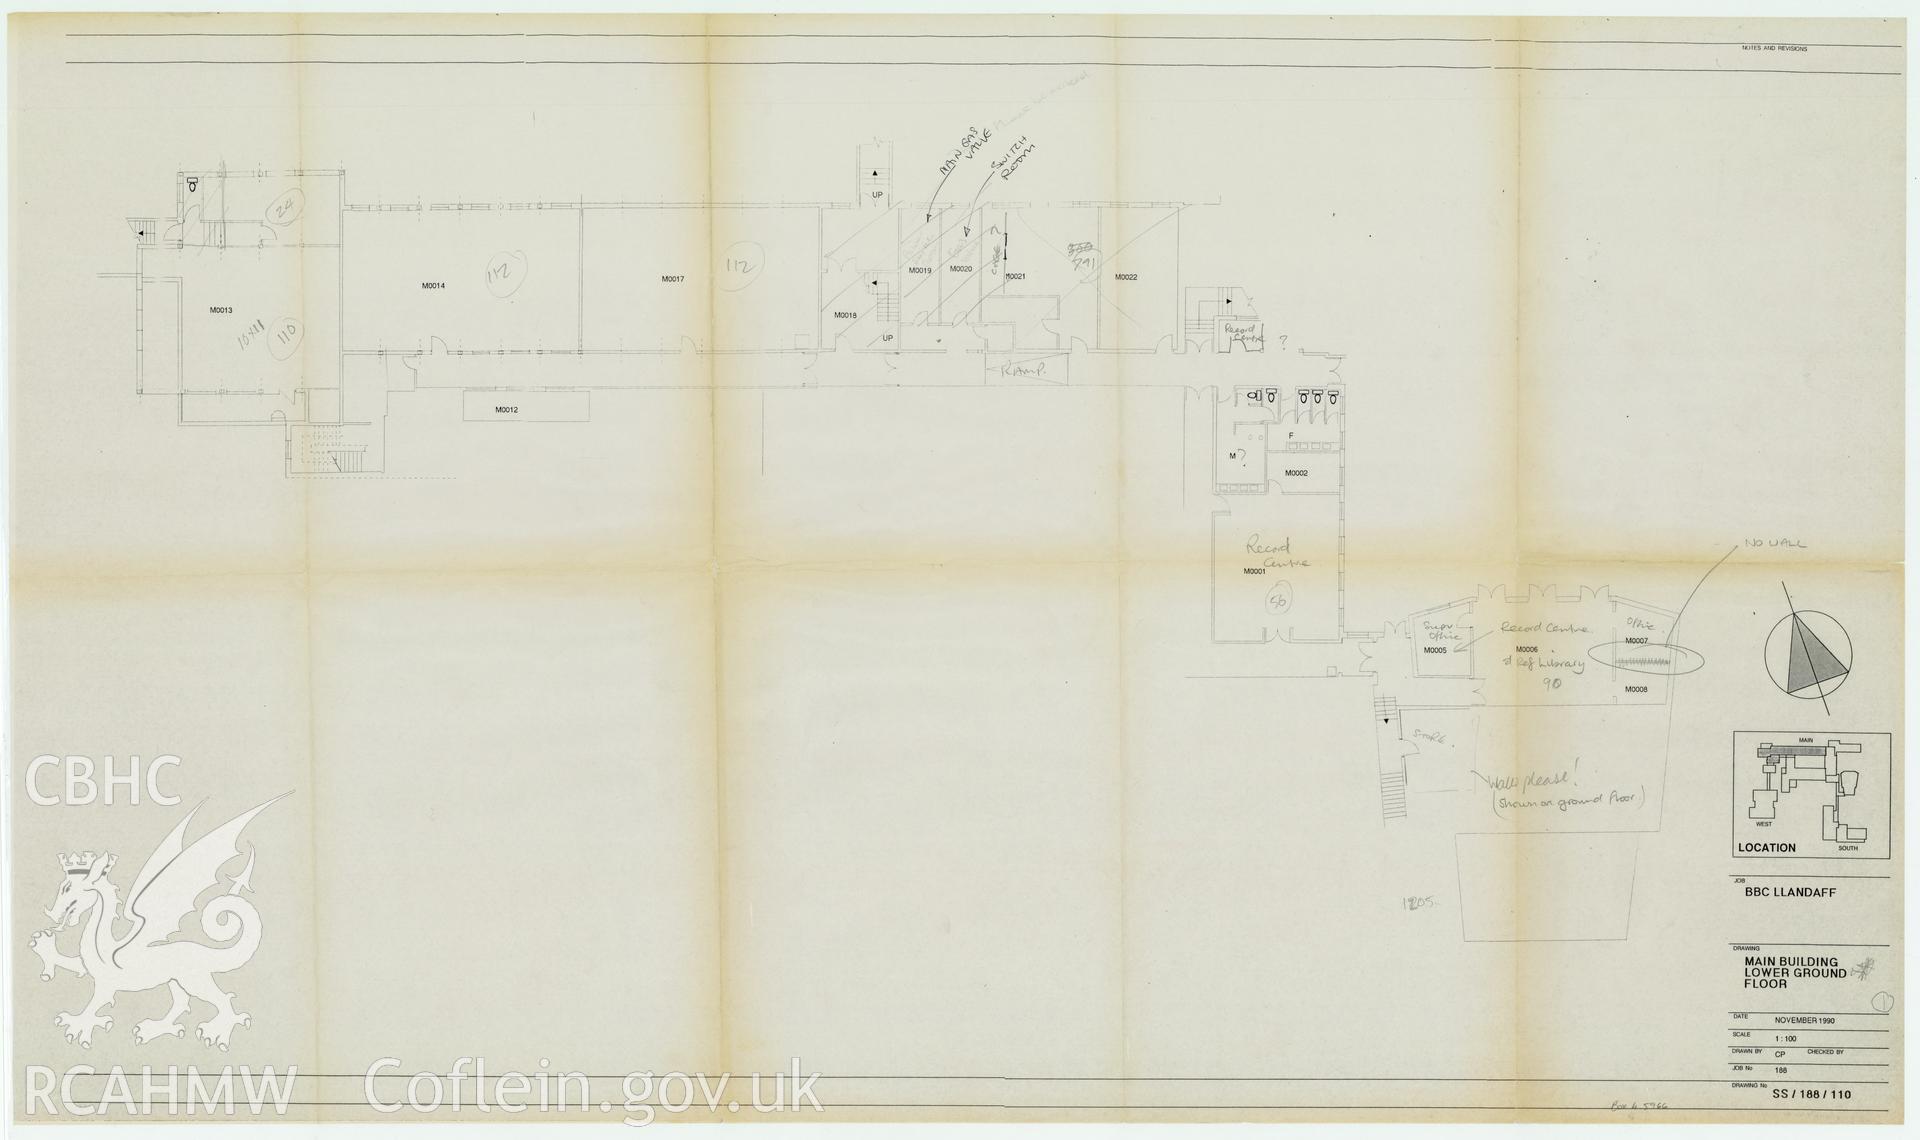 Digitised drawing plan of BBC Llandaff  - drawing of the main building, lower ground floor plan. Drawing no. SS/188/110. November 1990.